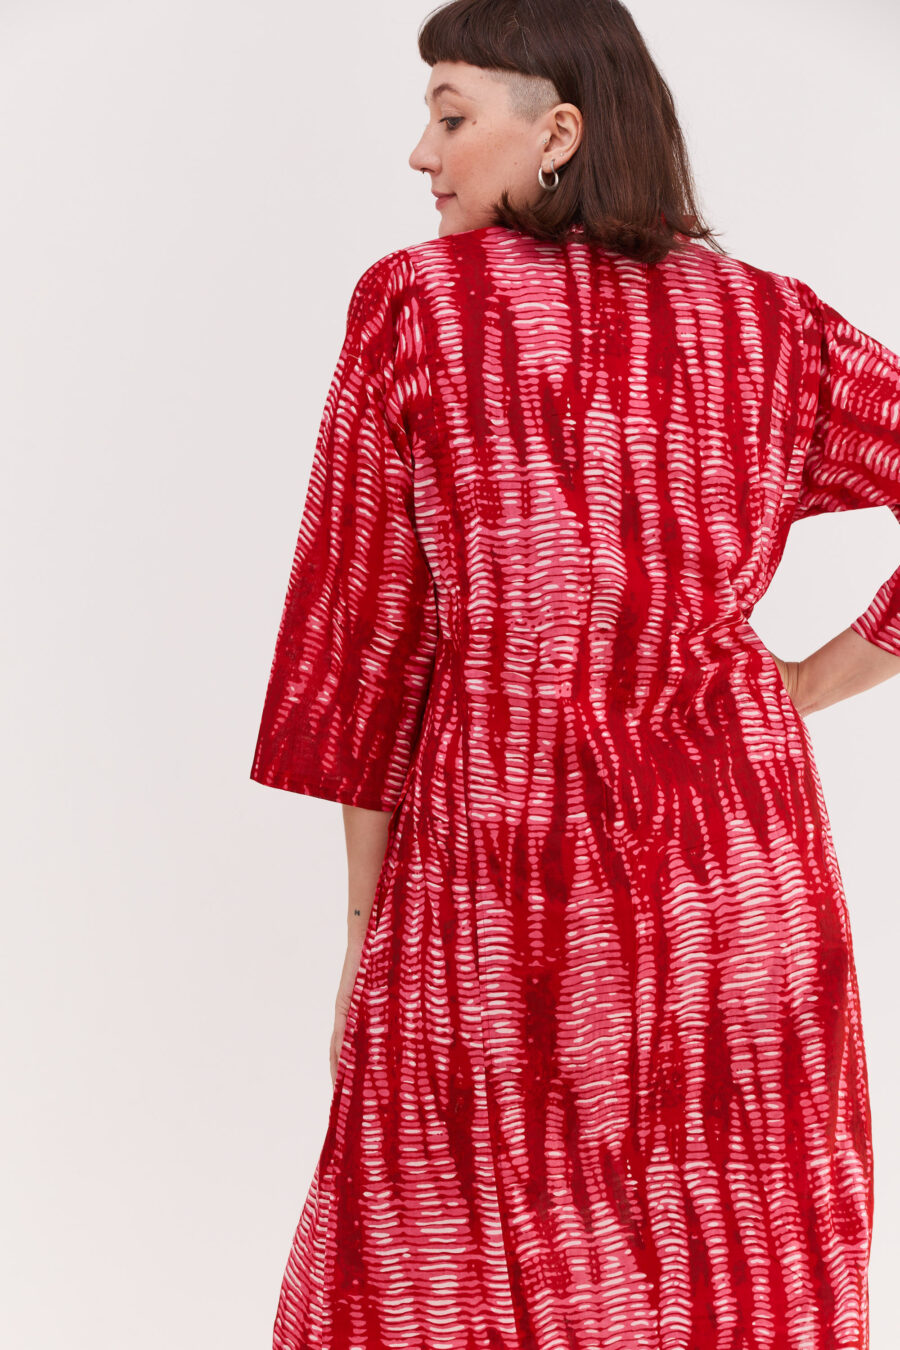 Jalabiya dress without sleeve | Uniquely designed dress - Stone red print, pink dress with red stone-like print by comfort zone boutique